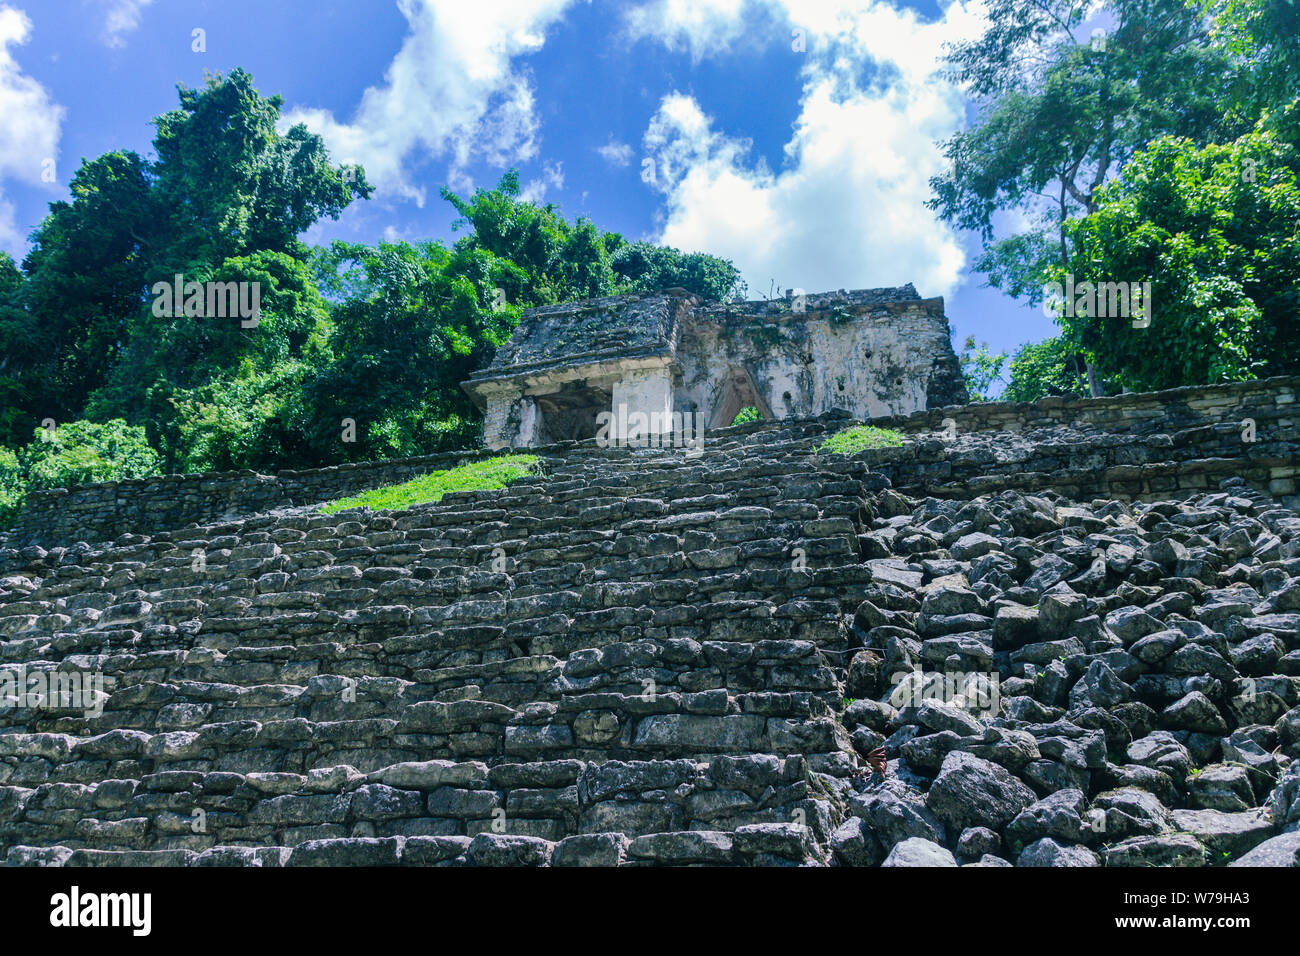 Palenque, Chiapas / Mexico - 21/07/2019: Detail of the archaeological pre hispanic mayan site of Palenque in Chiapas Mexico Stock Photo